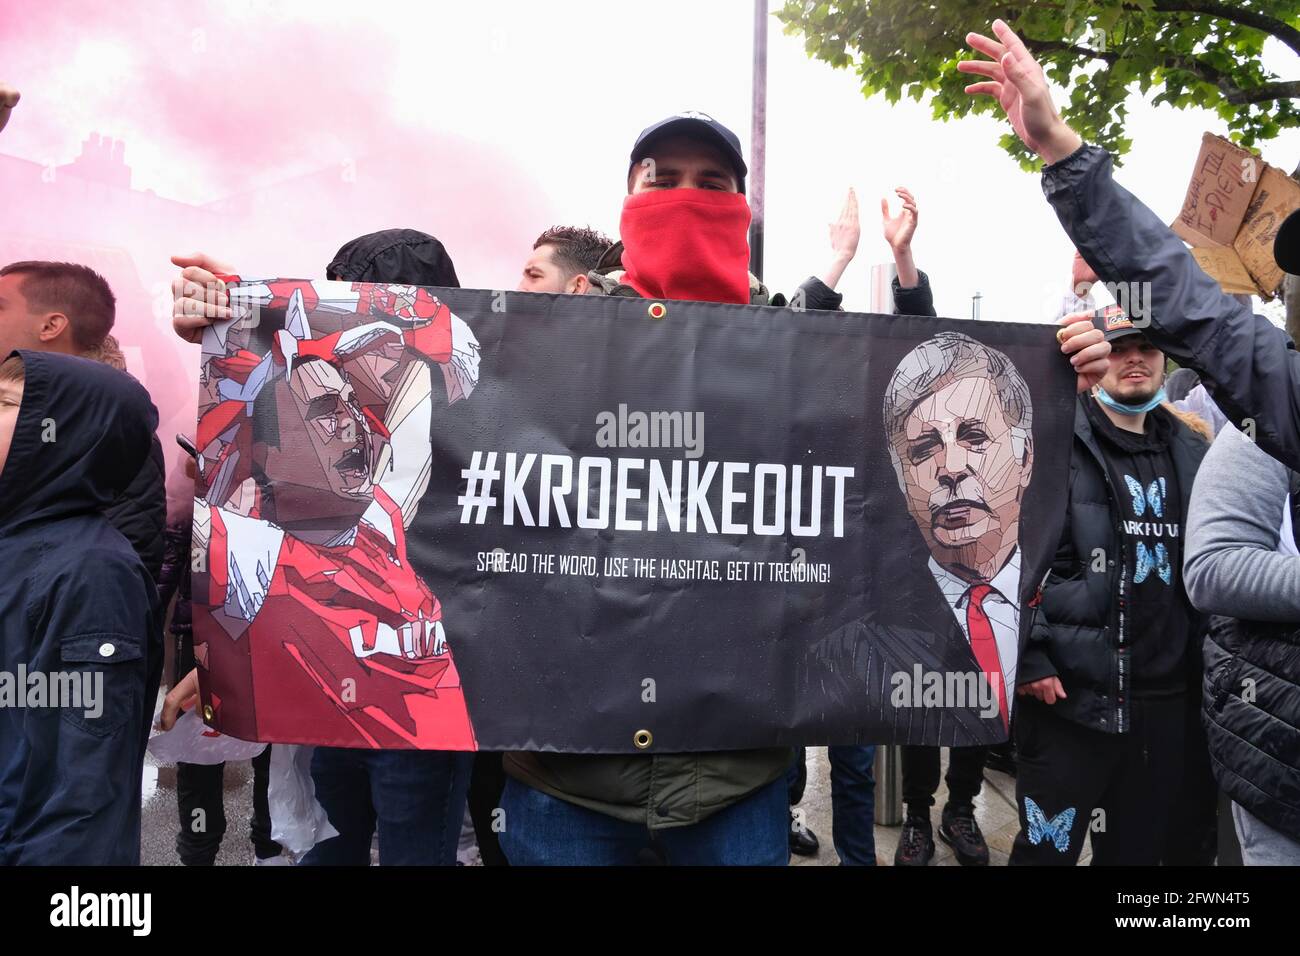 London, UK 23/05/21 Arsenal football fans protest against club owner Stan Kroenke before Brighton match and the final game of the Premiership season. Stock Photo